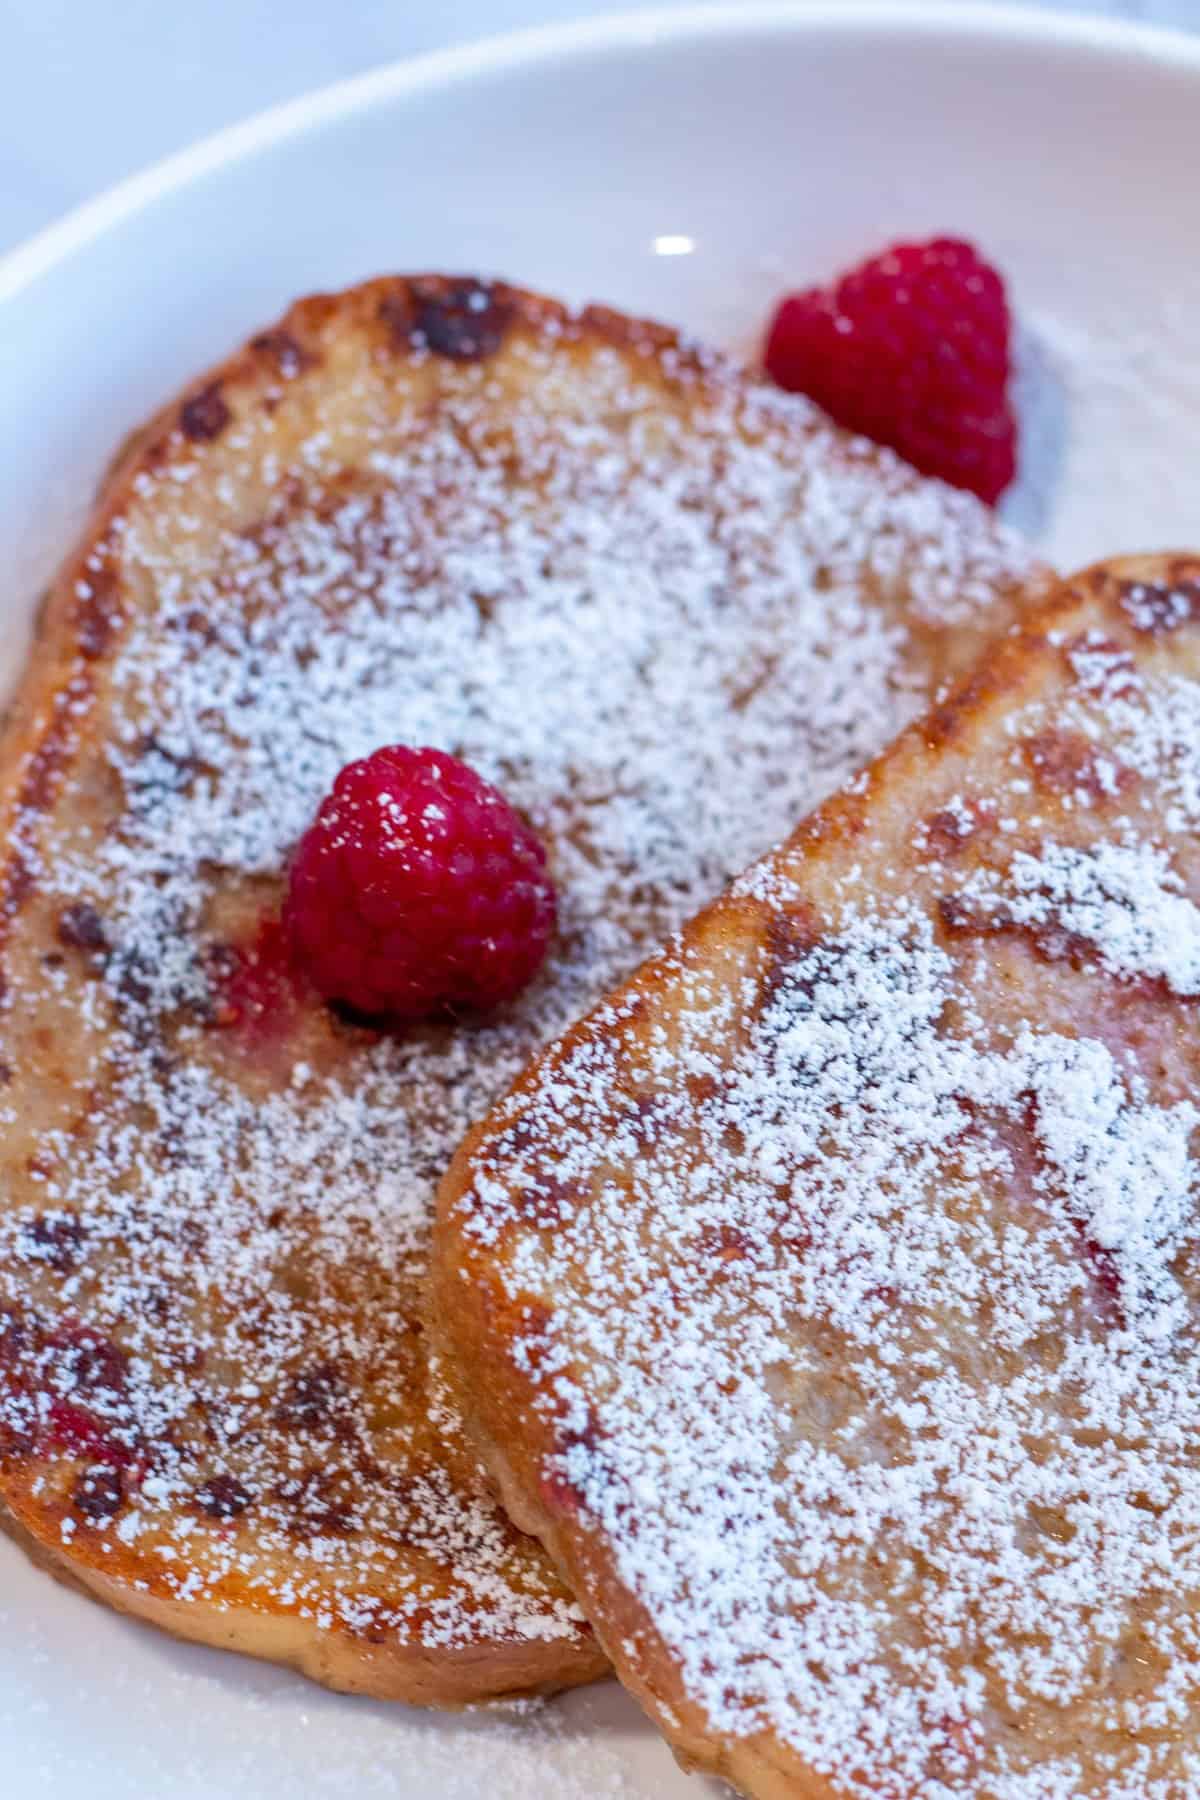 Raspberry french toast served with powdered sugar and raspberries on top